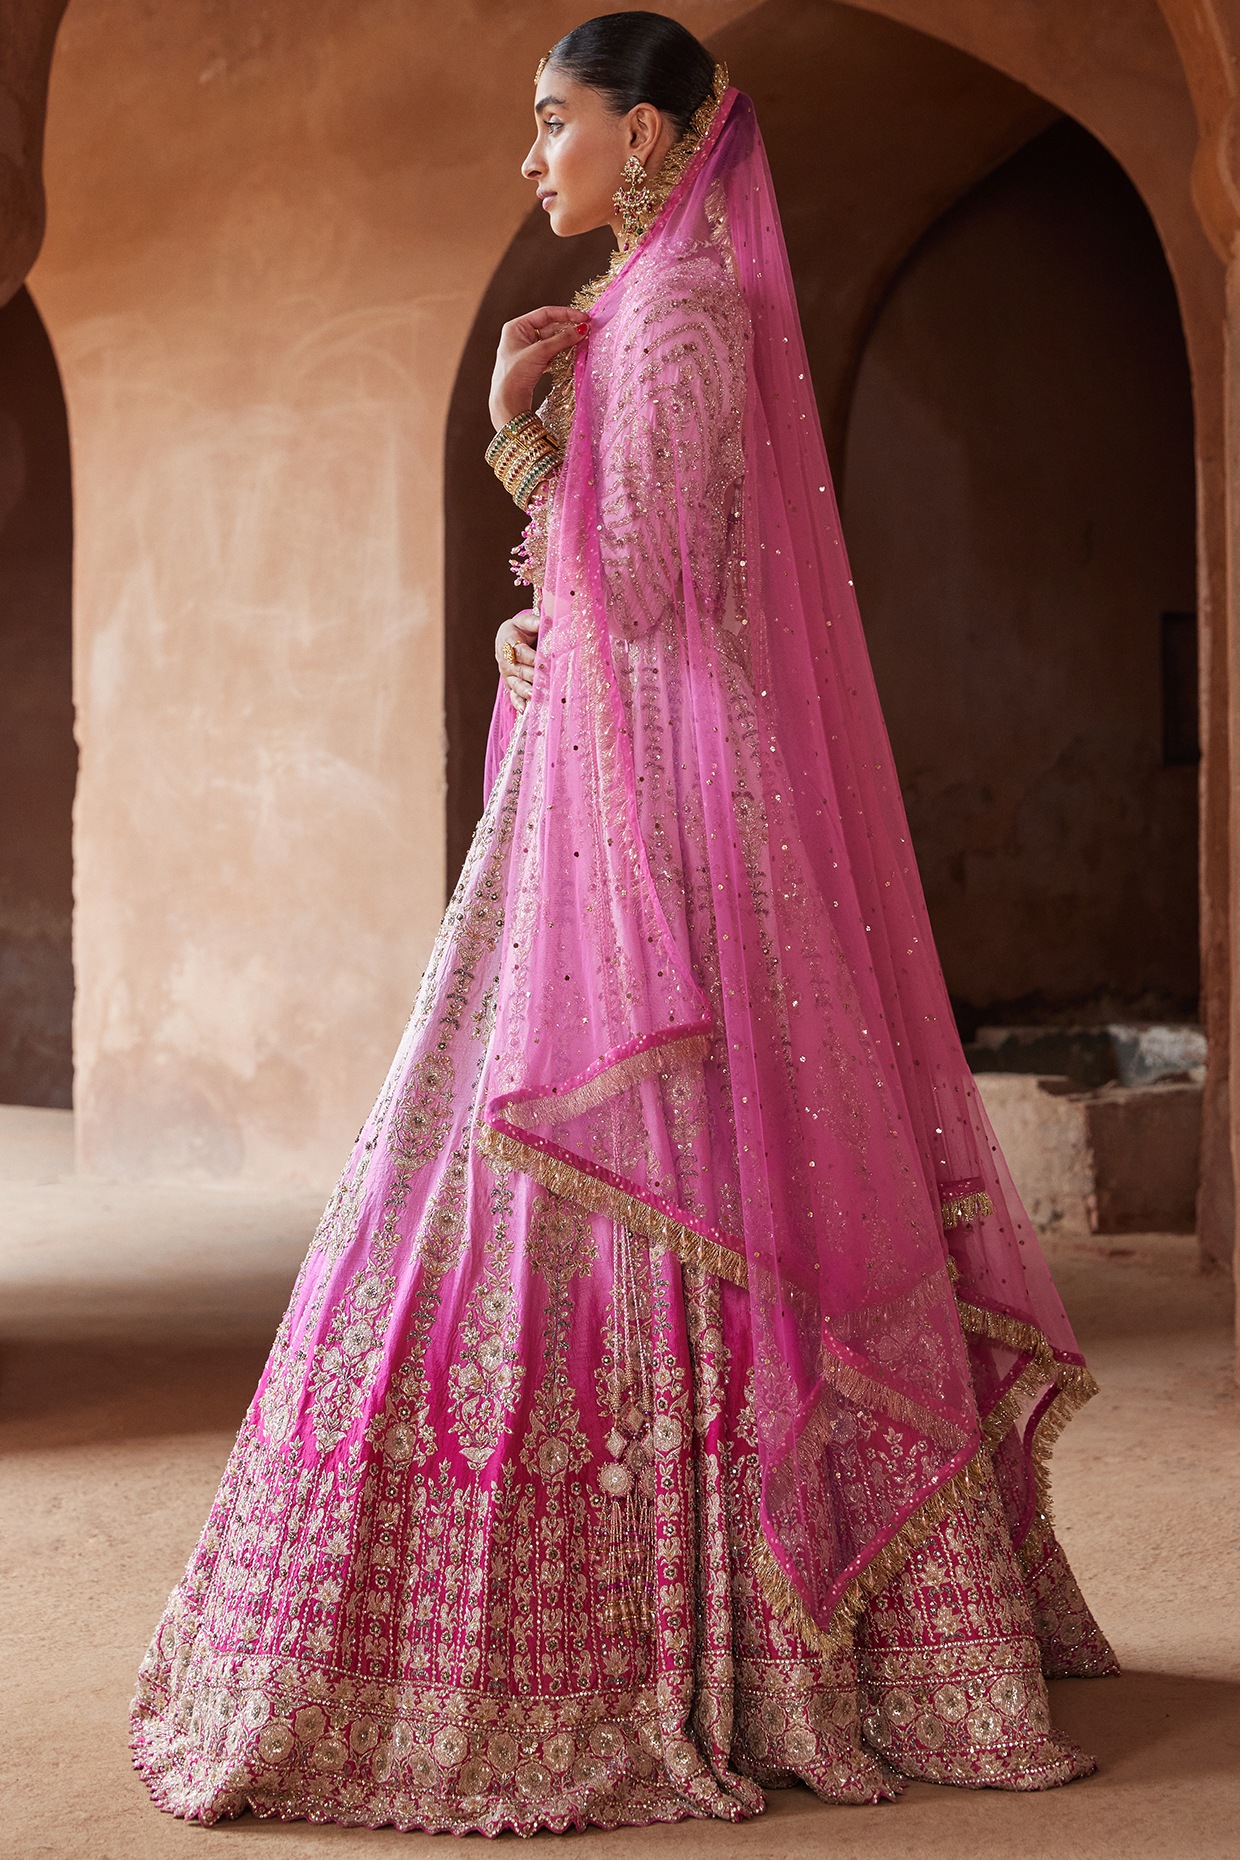 Can't decide what coloured dupatta to get dyed with this lehenga for  cousin's wedding : r/IndianFashionAddicts